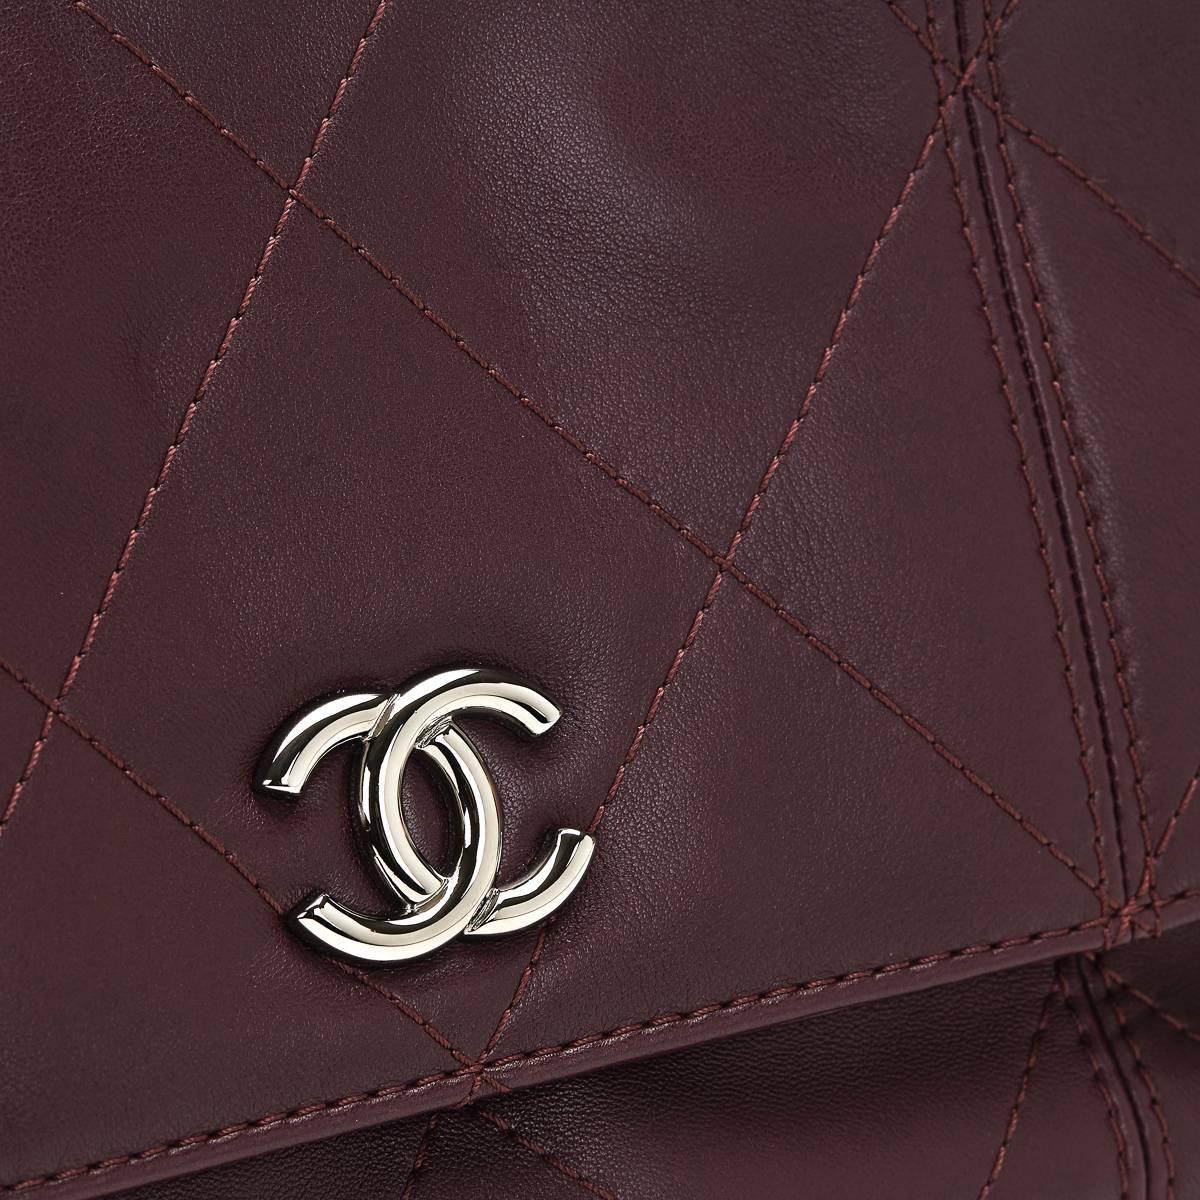 2011 Chanel Maroon Quilted Lambskin Classic Single Flap Bag 3